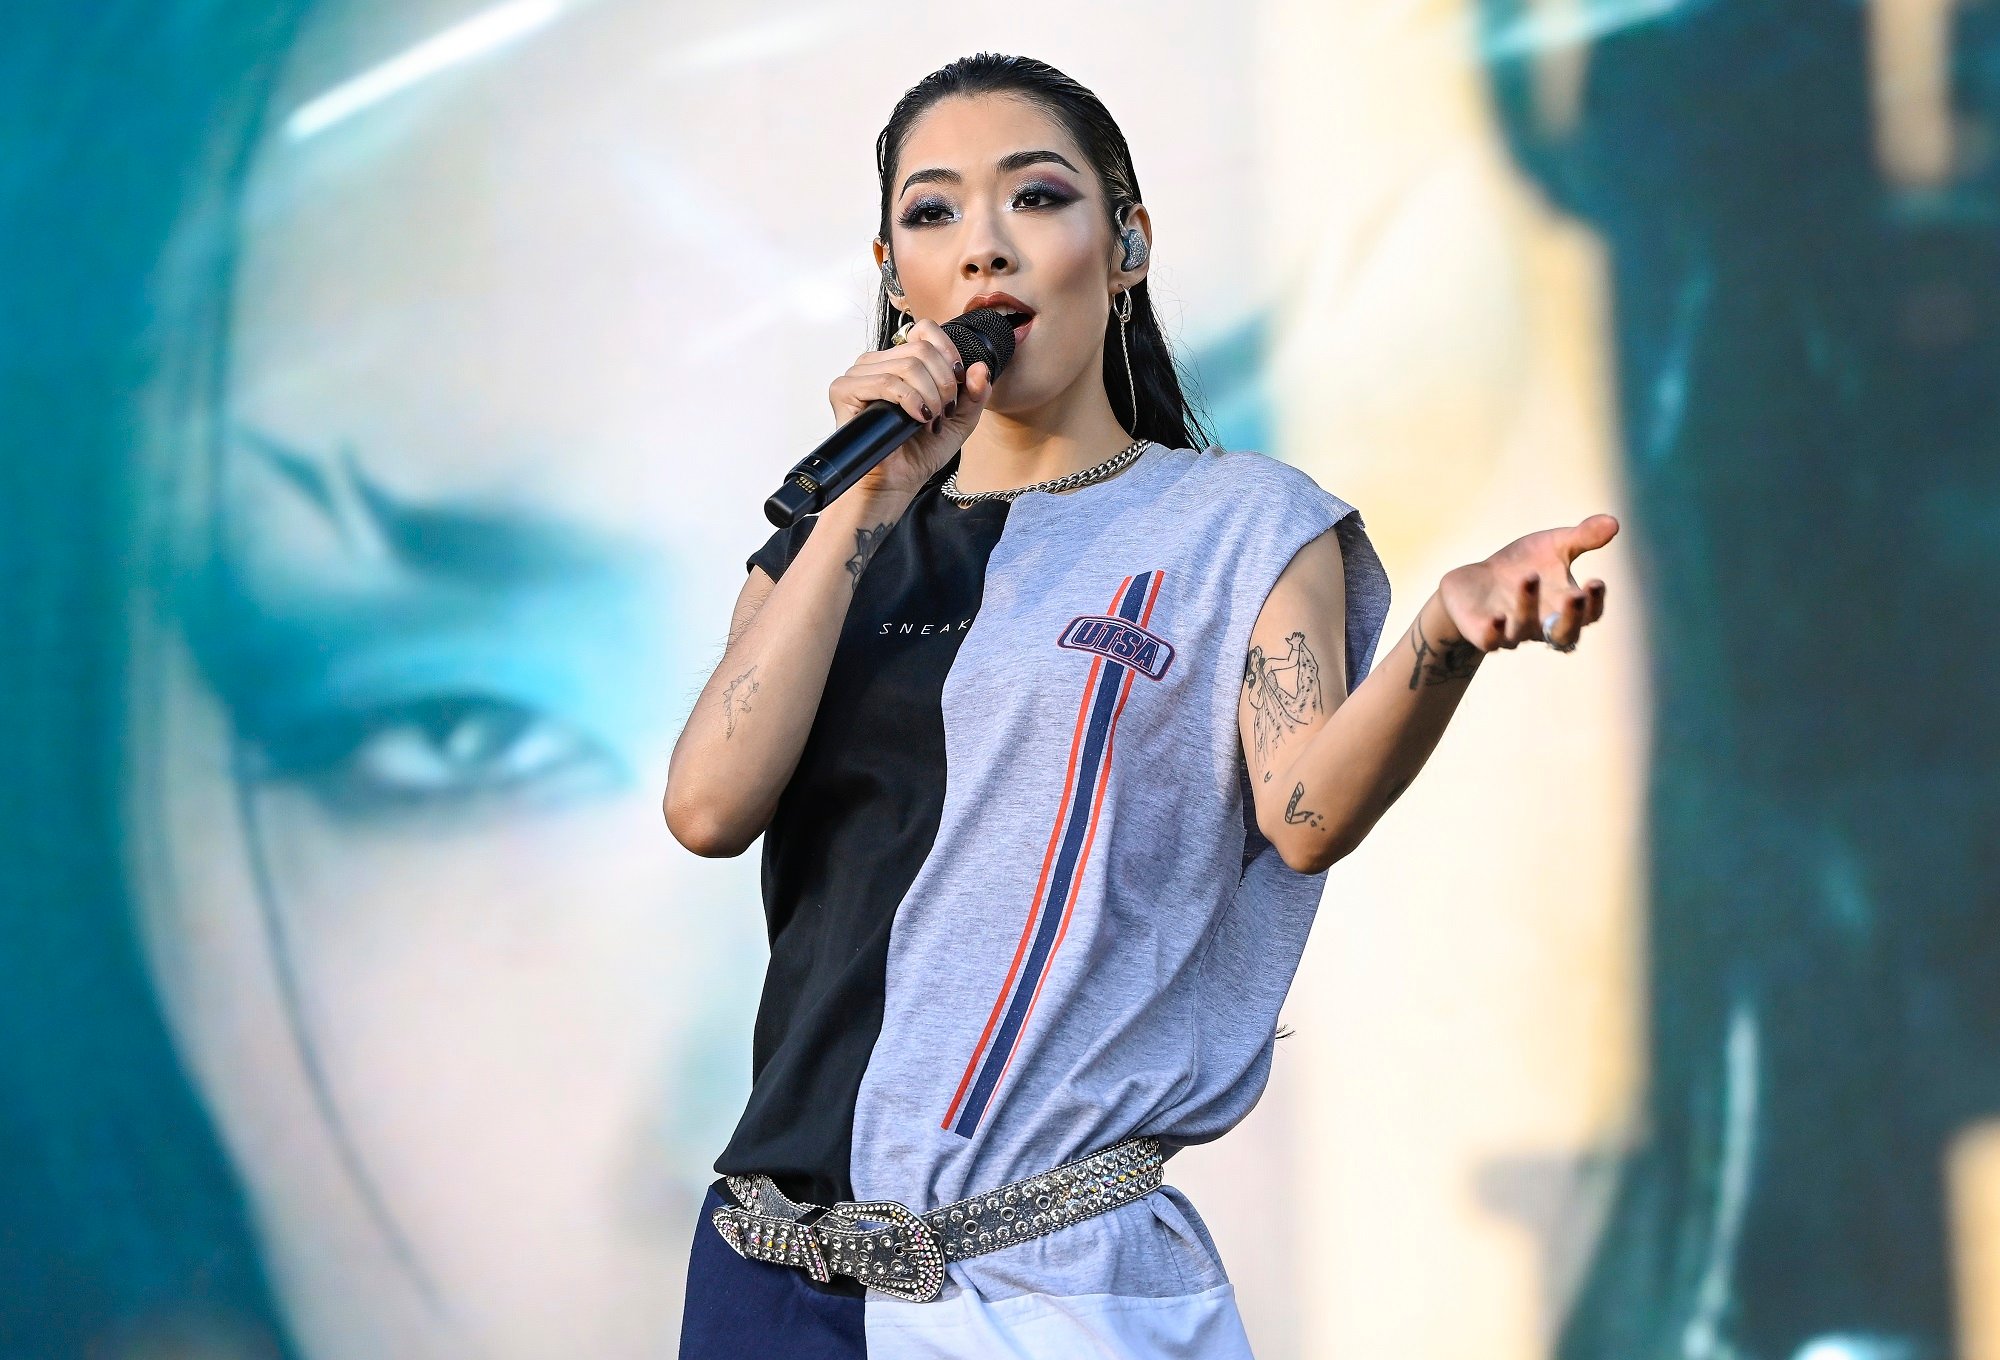 Rina Sawayama performs at the Outside Lands Music And Arts Festival